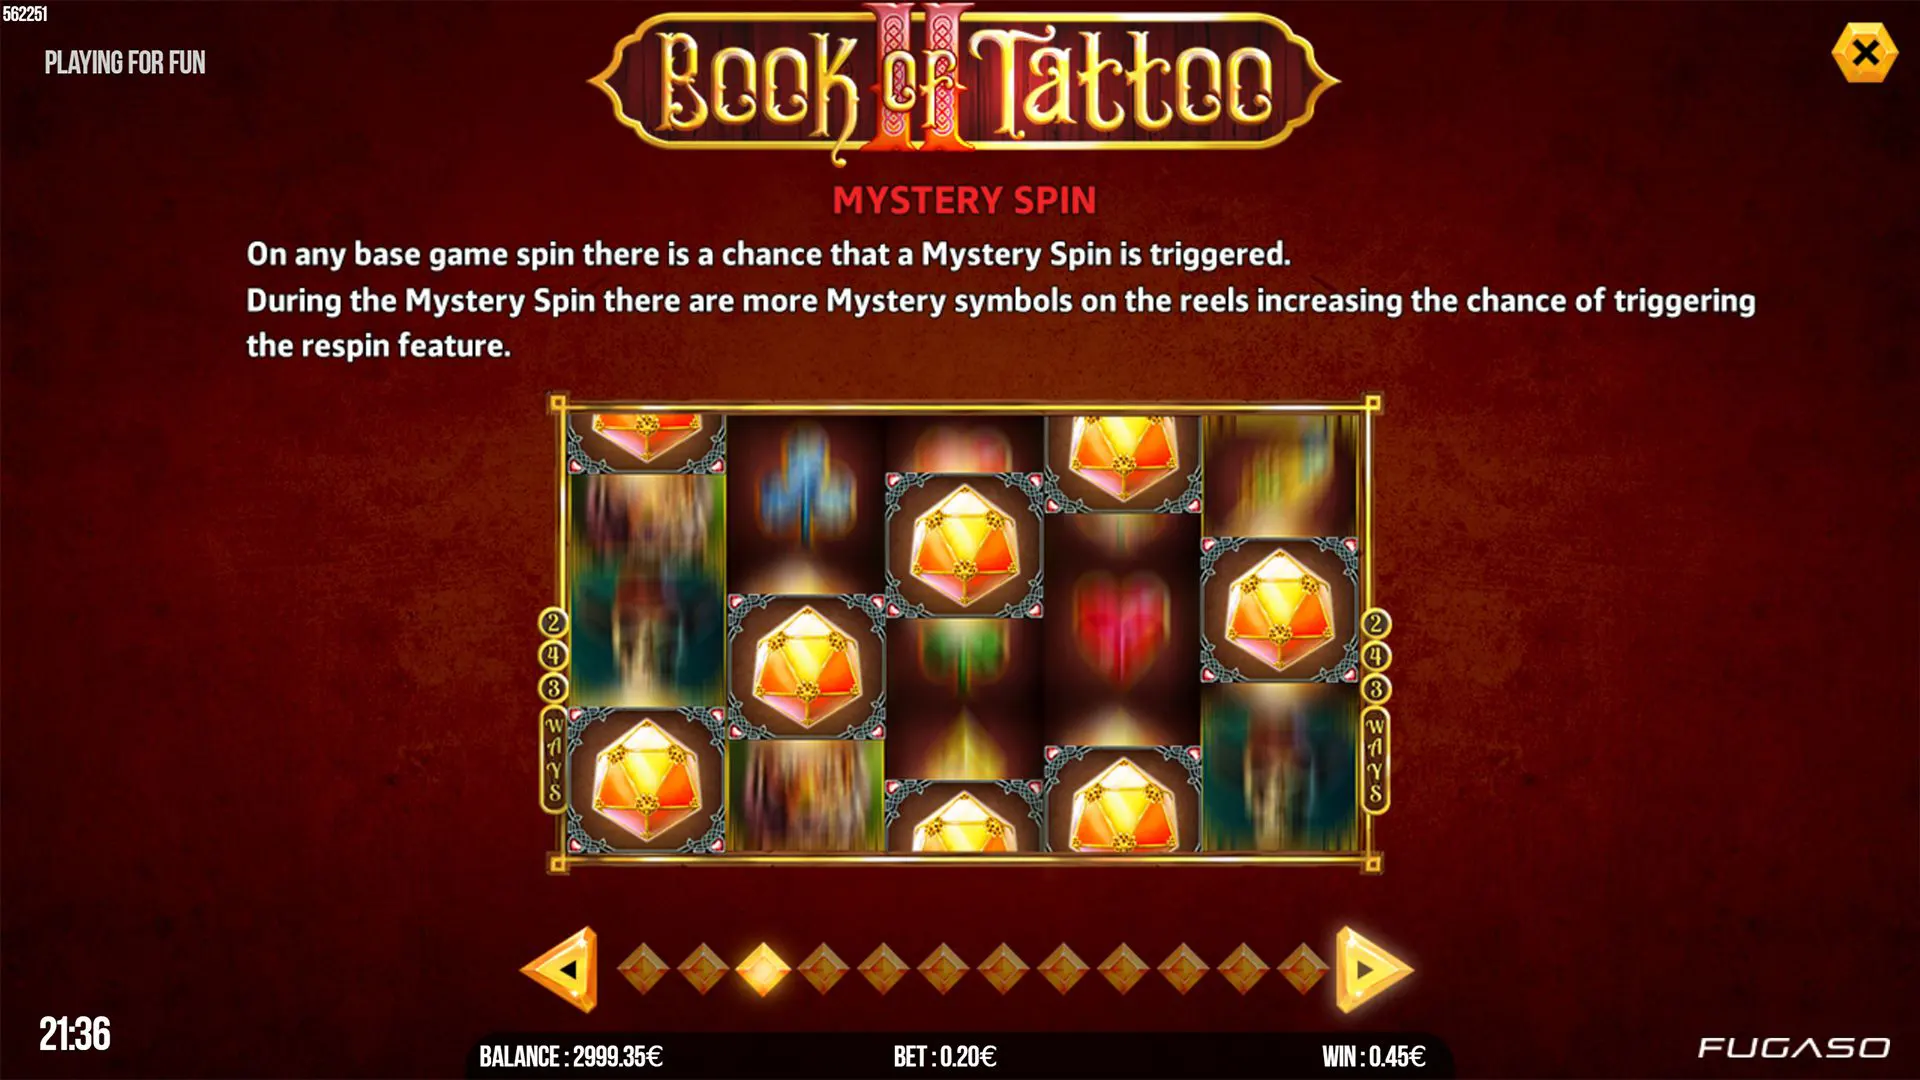 Book of Tattoo 2 Mystery Spins